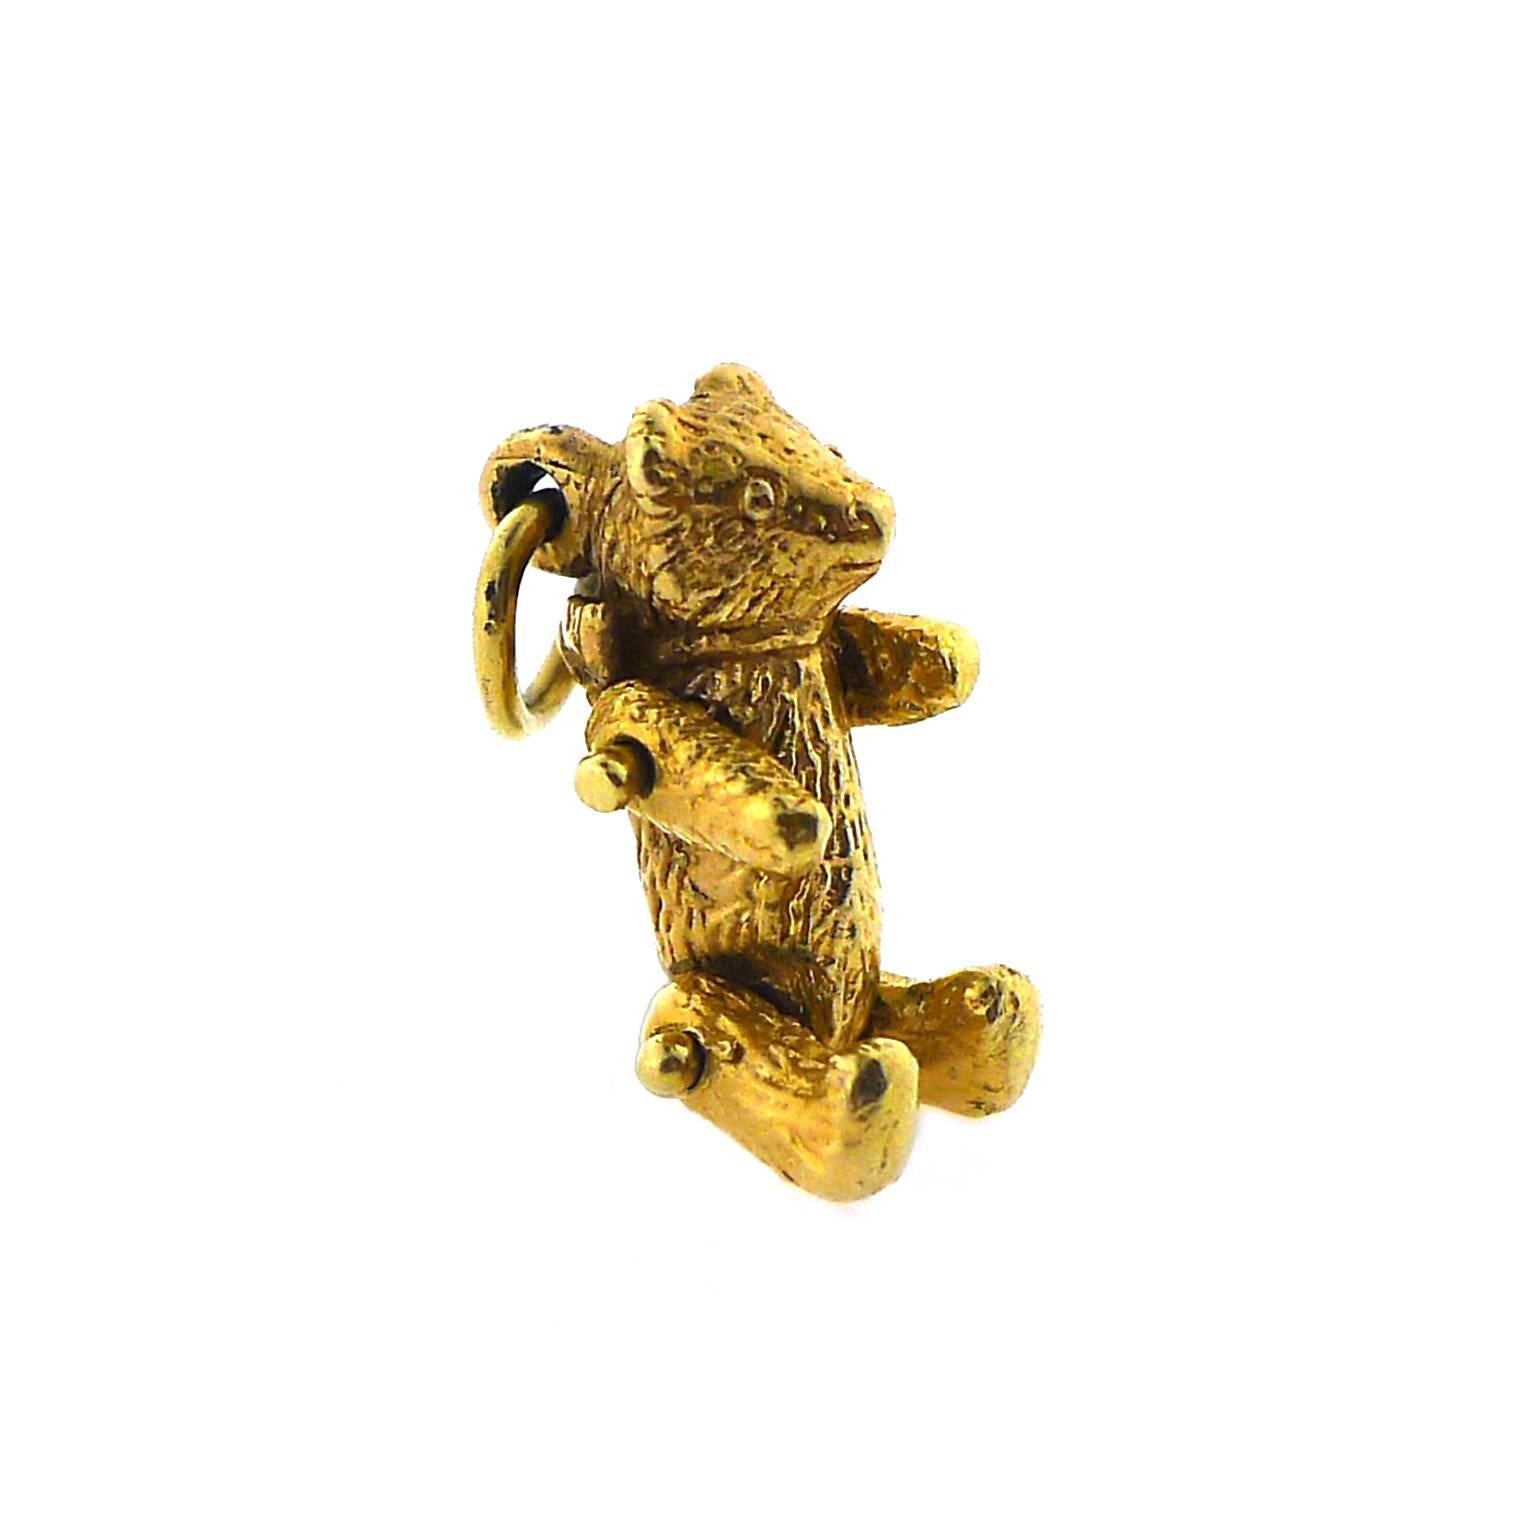 Adorable 14 karat yellow gold teddy bear with moving arms and legs, weighing 2.16 pennyweight. Attached to rear double jump rings. 1/2 inch long from head to foot.